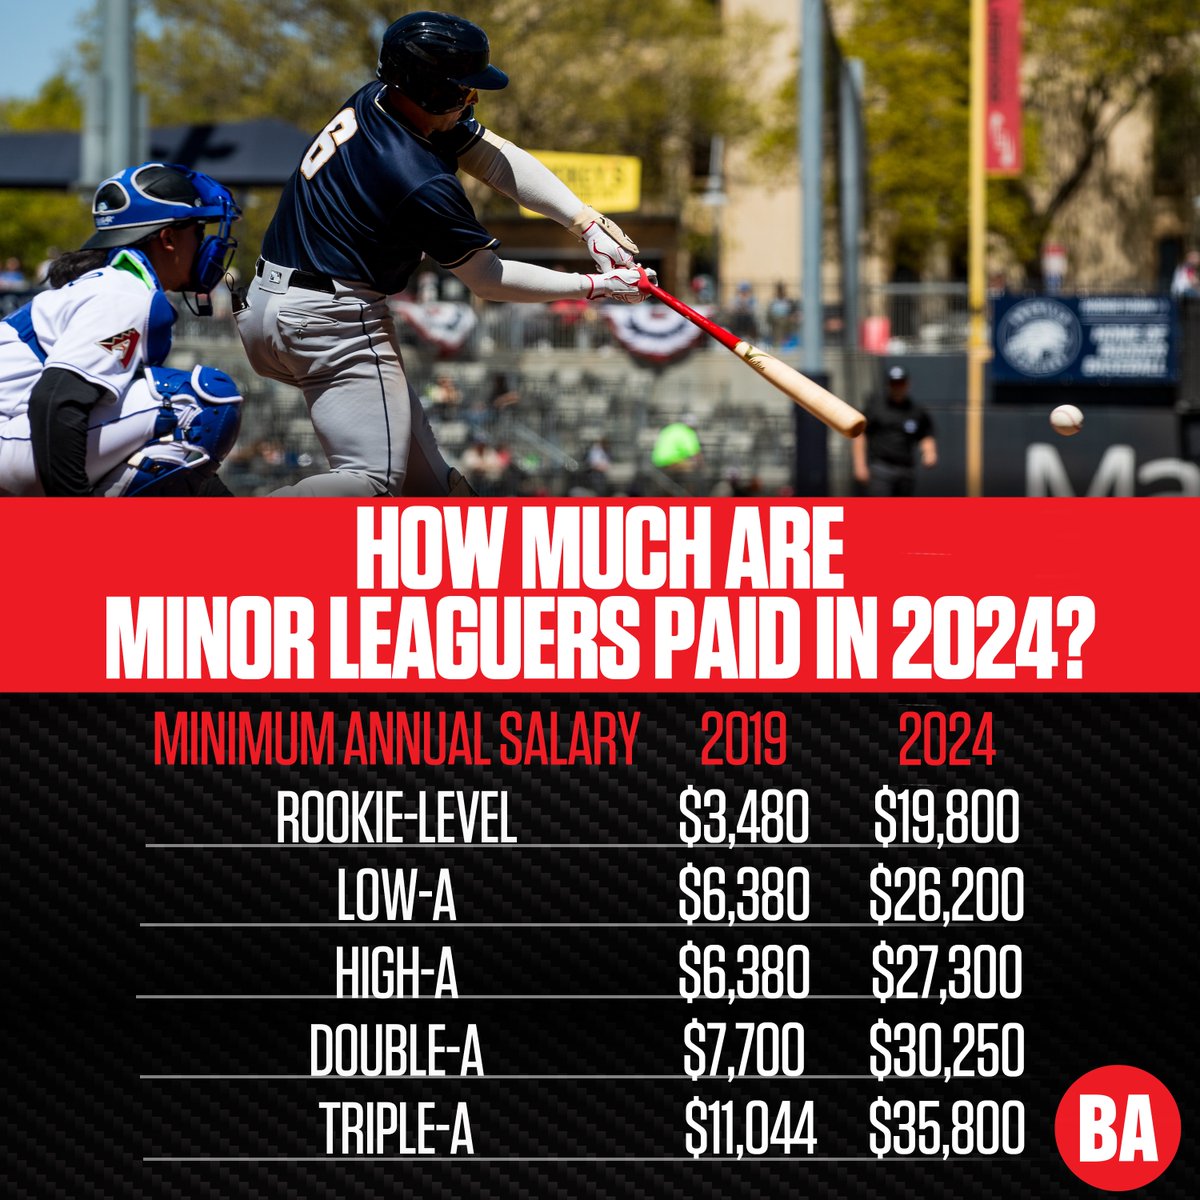 How Much Are Minor League Baseball Players Paid In 2024? We break down the dramatic difference between the numbers and benefits provided to players in 2019 compared to 2024. baseballamerica.com/stories/how-mu…